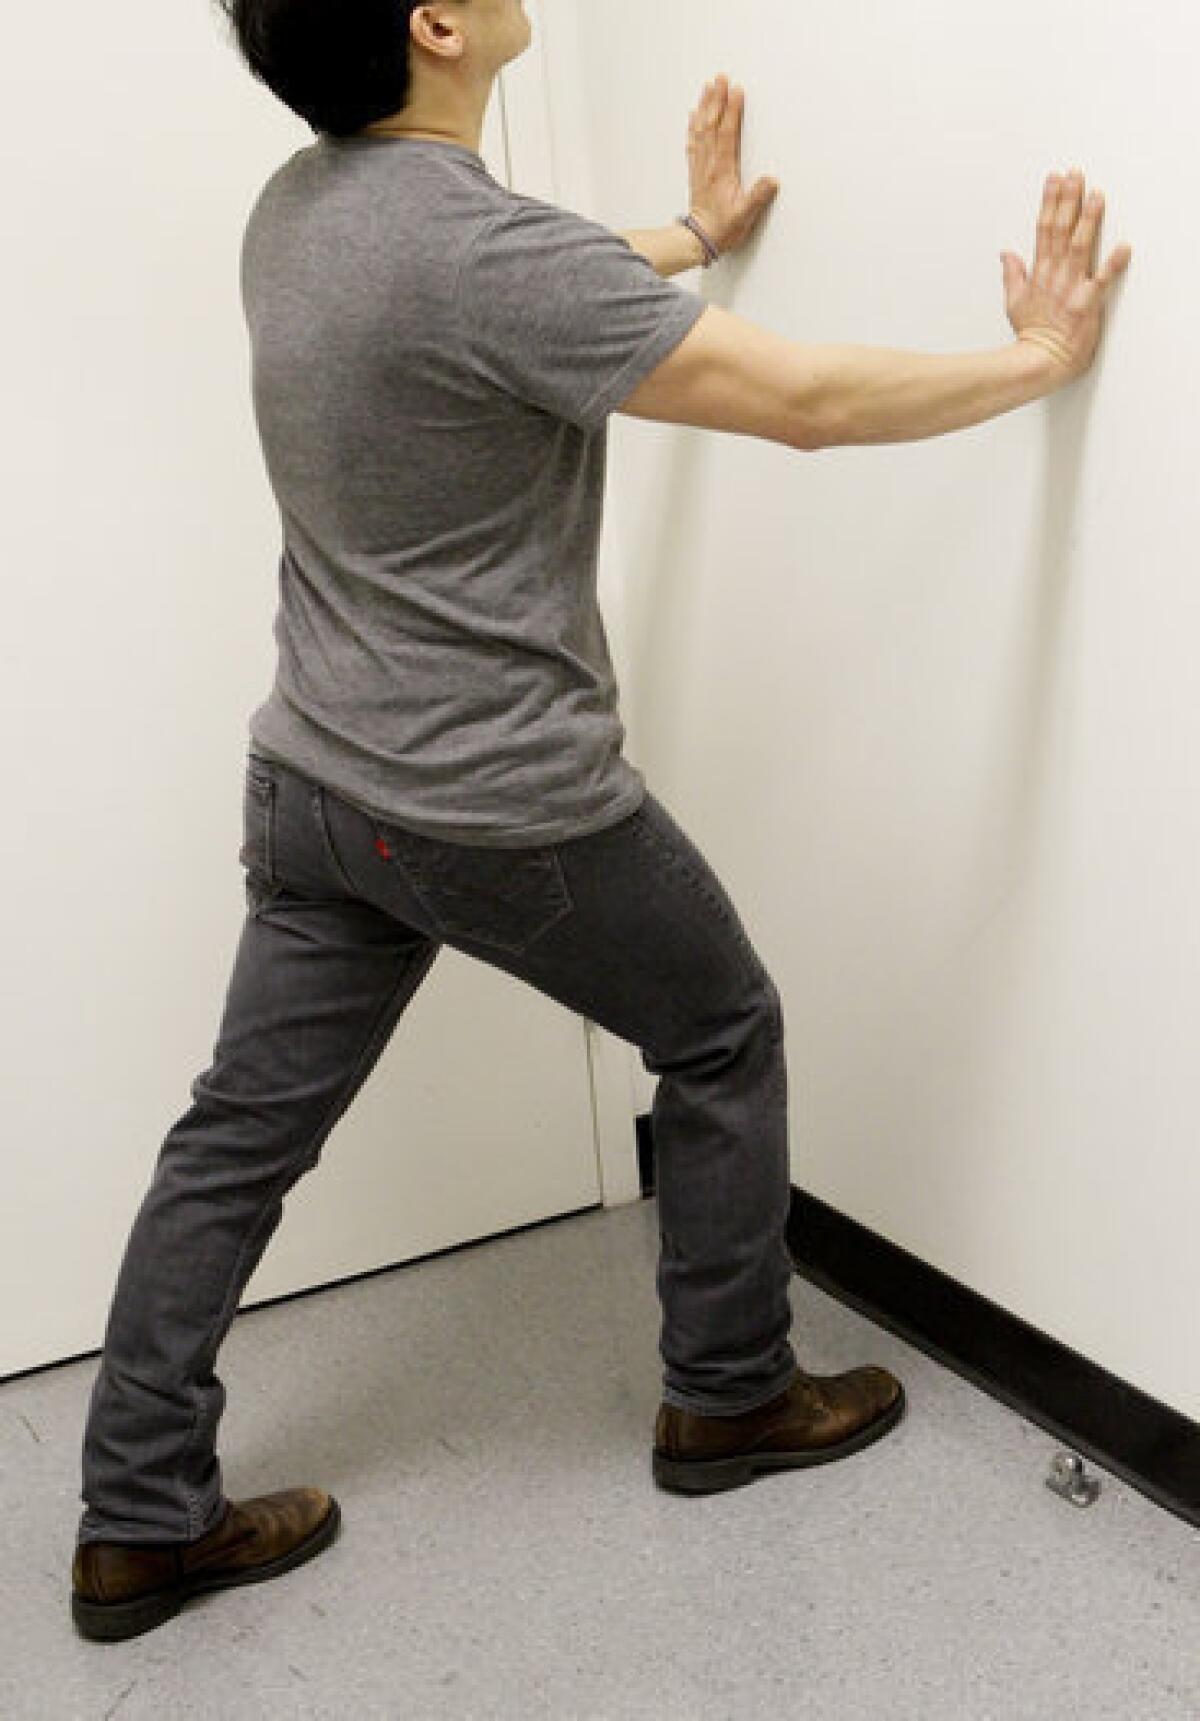 Help relieve heel pain with a calf stretch that involves keeping both heels on the ground while pushing against a wall.